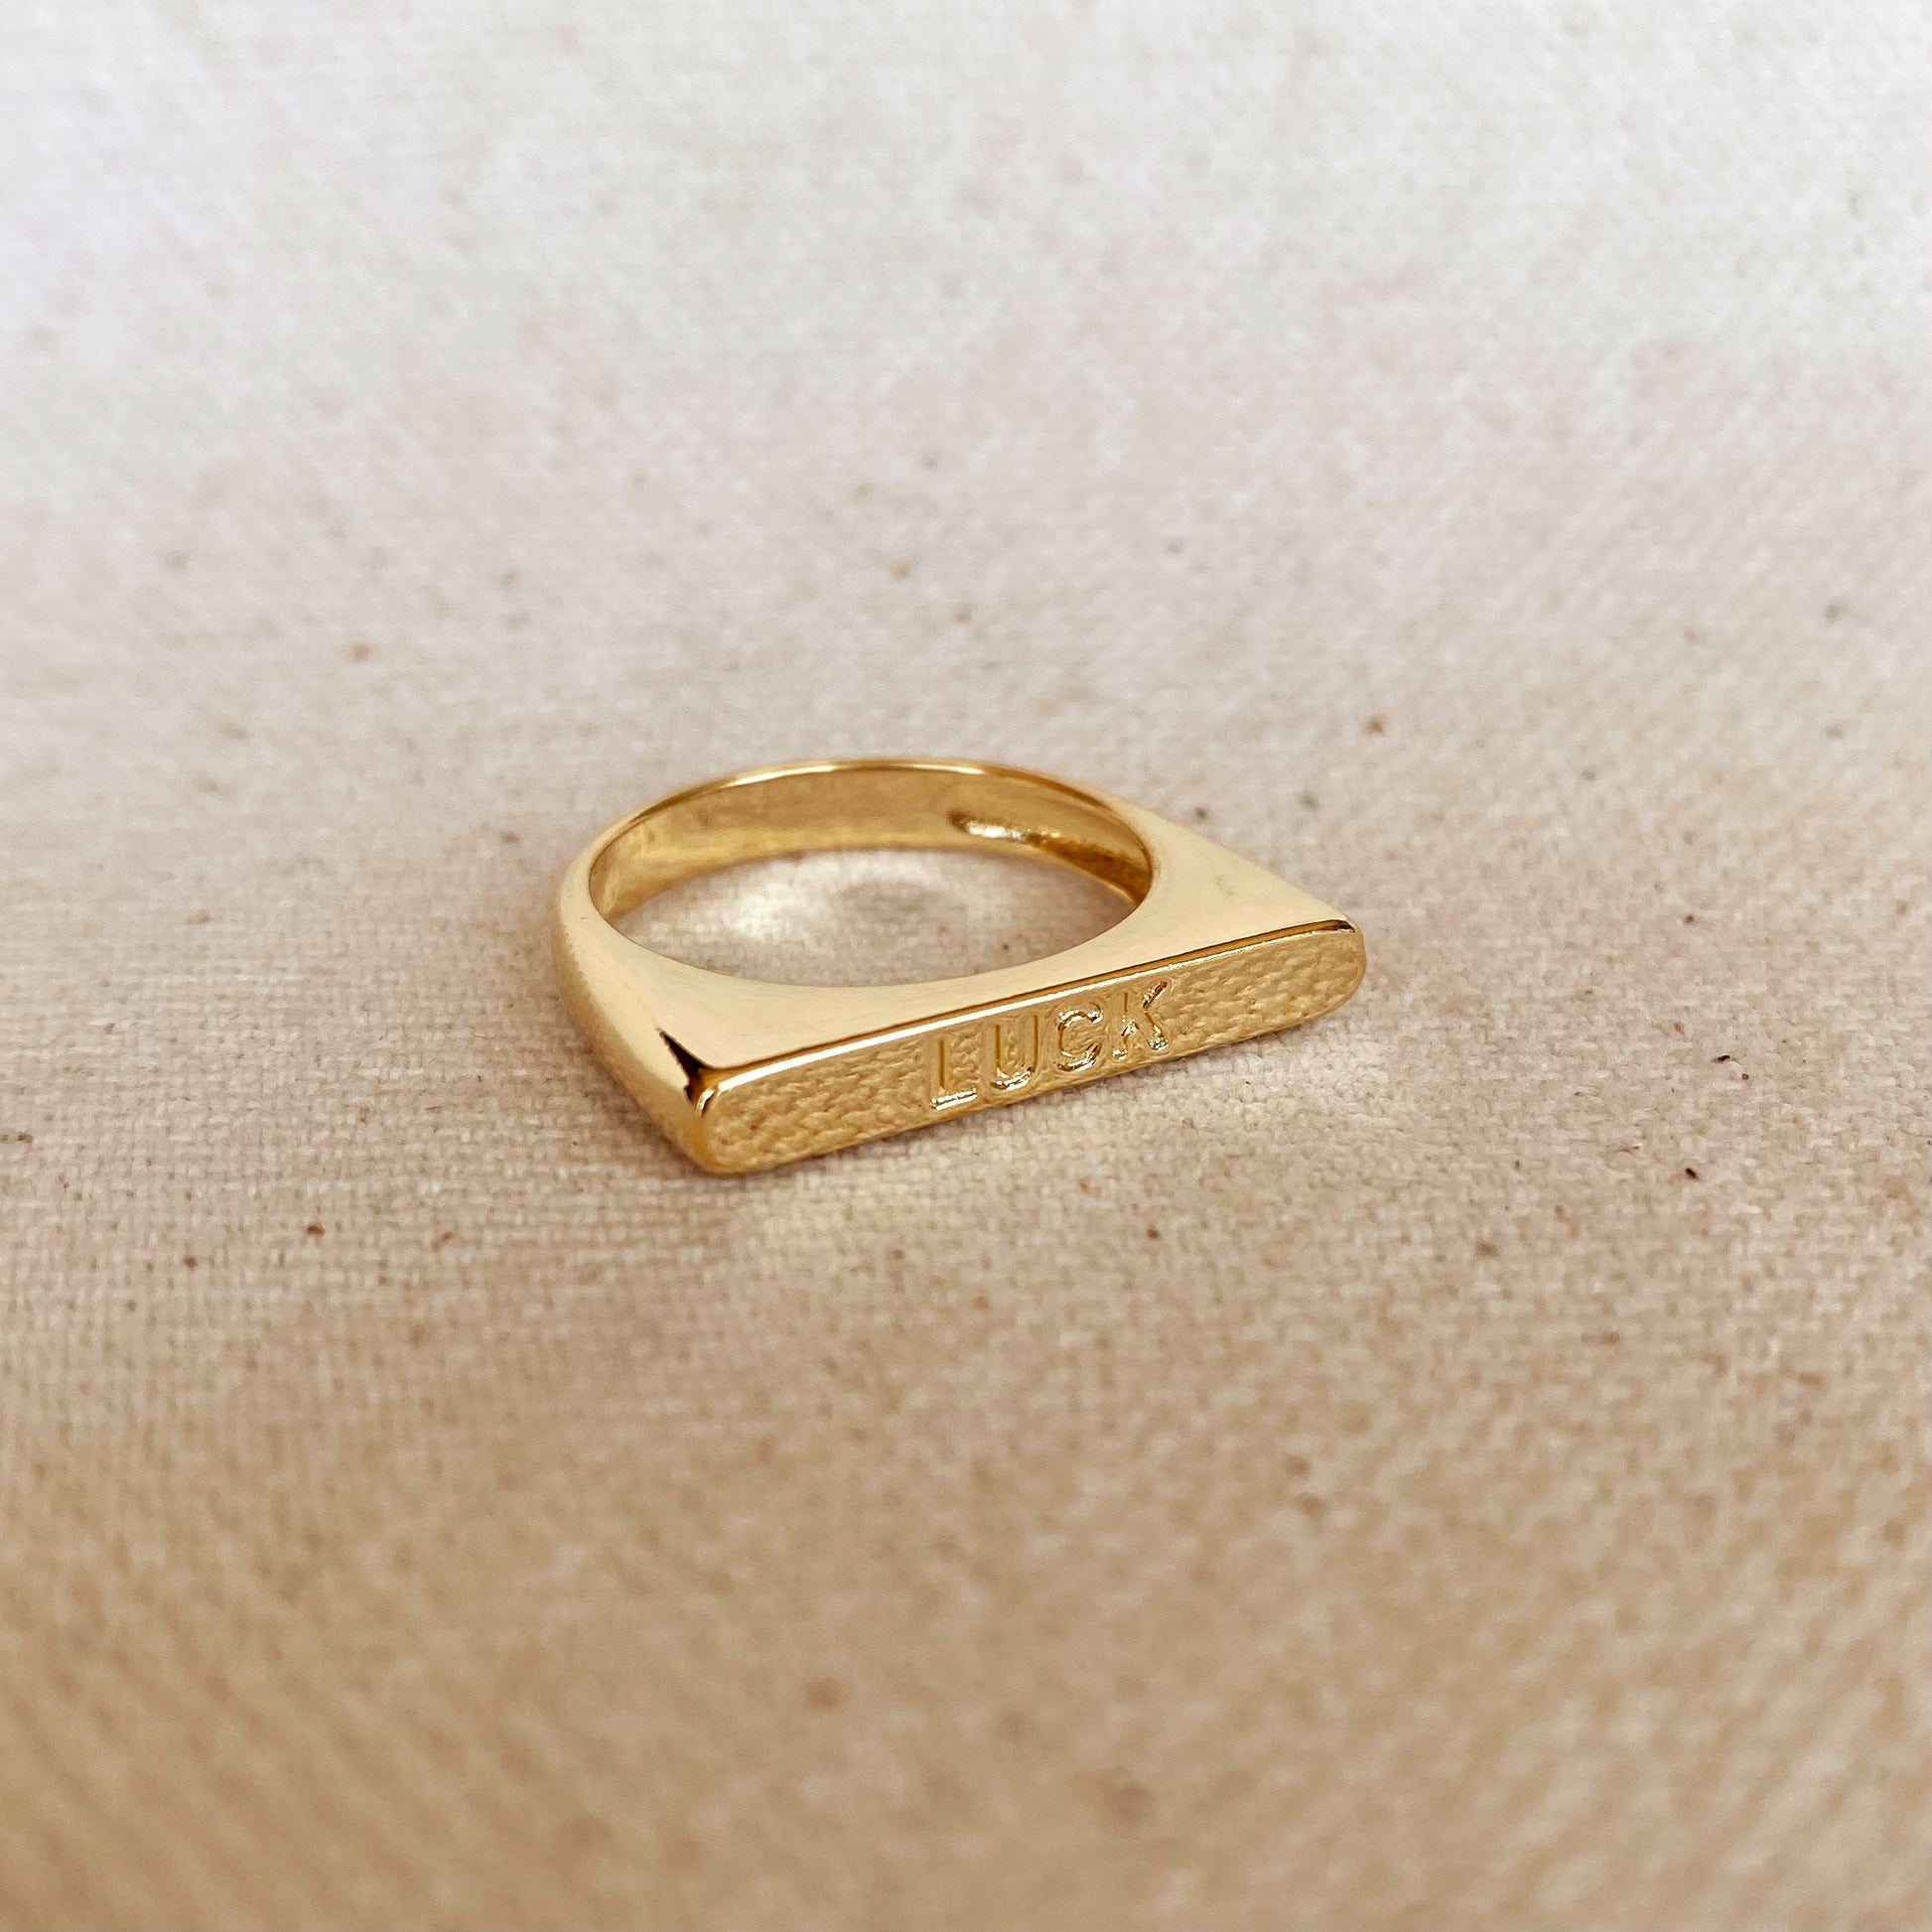 GoldFi 18k Gold Filled Luck Engraved Stackable Ring